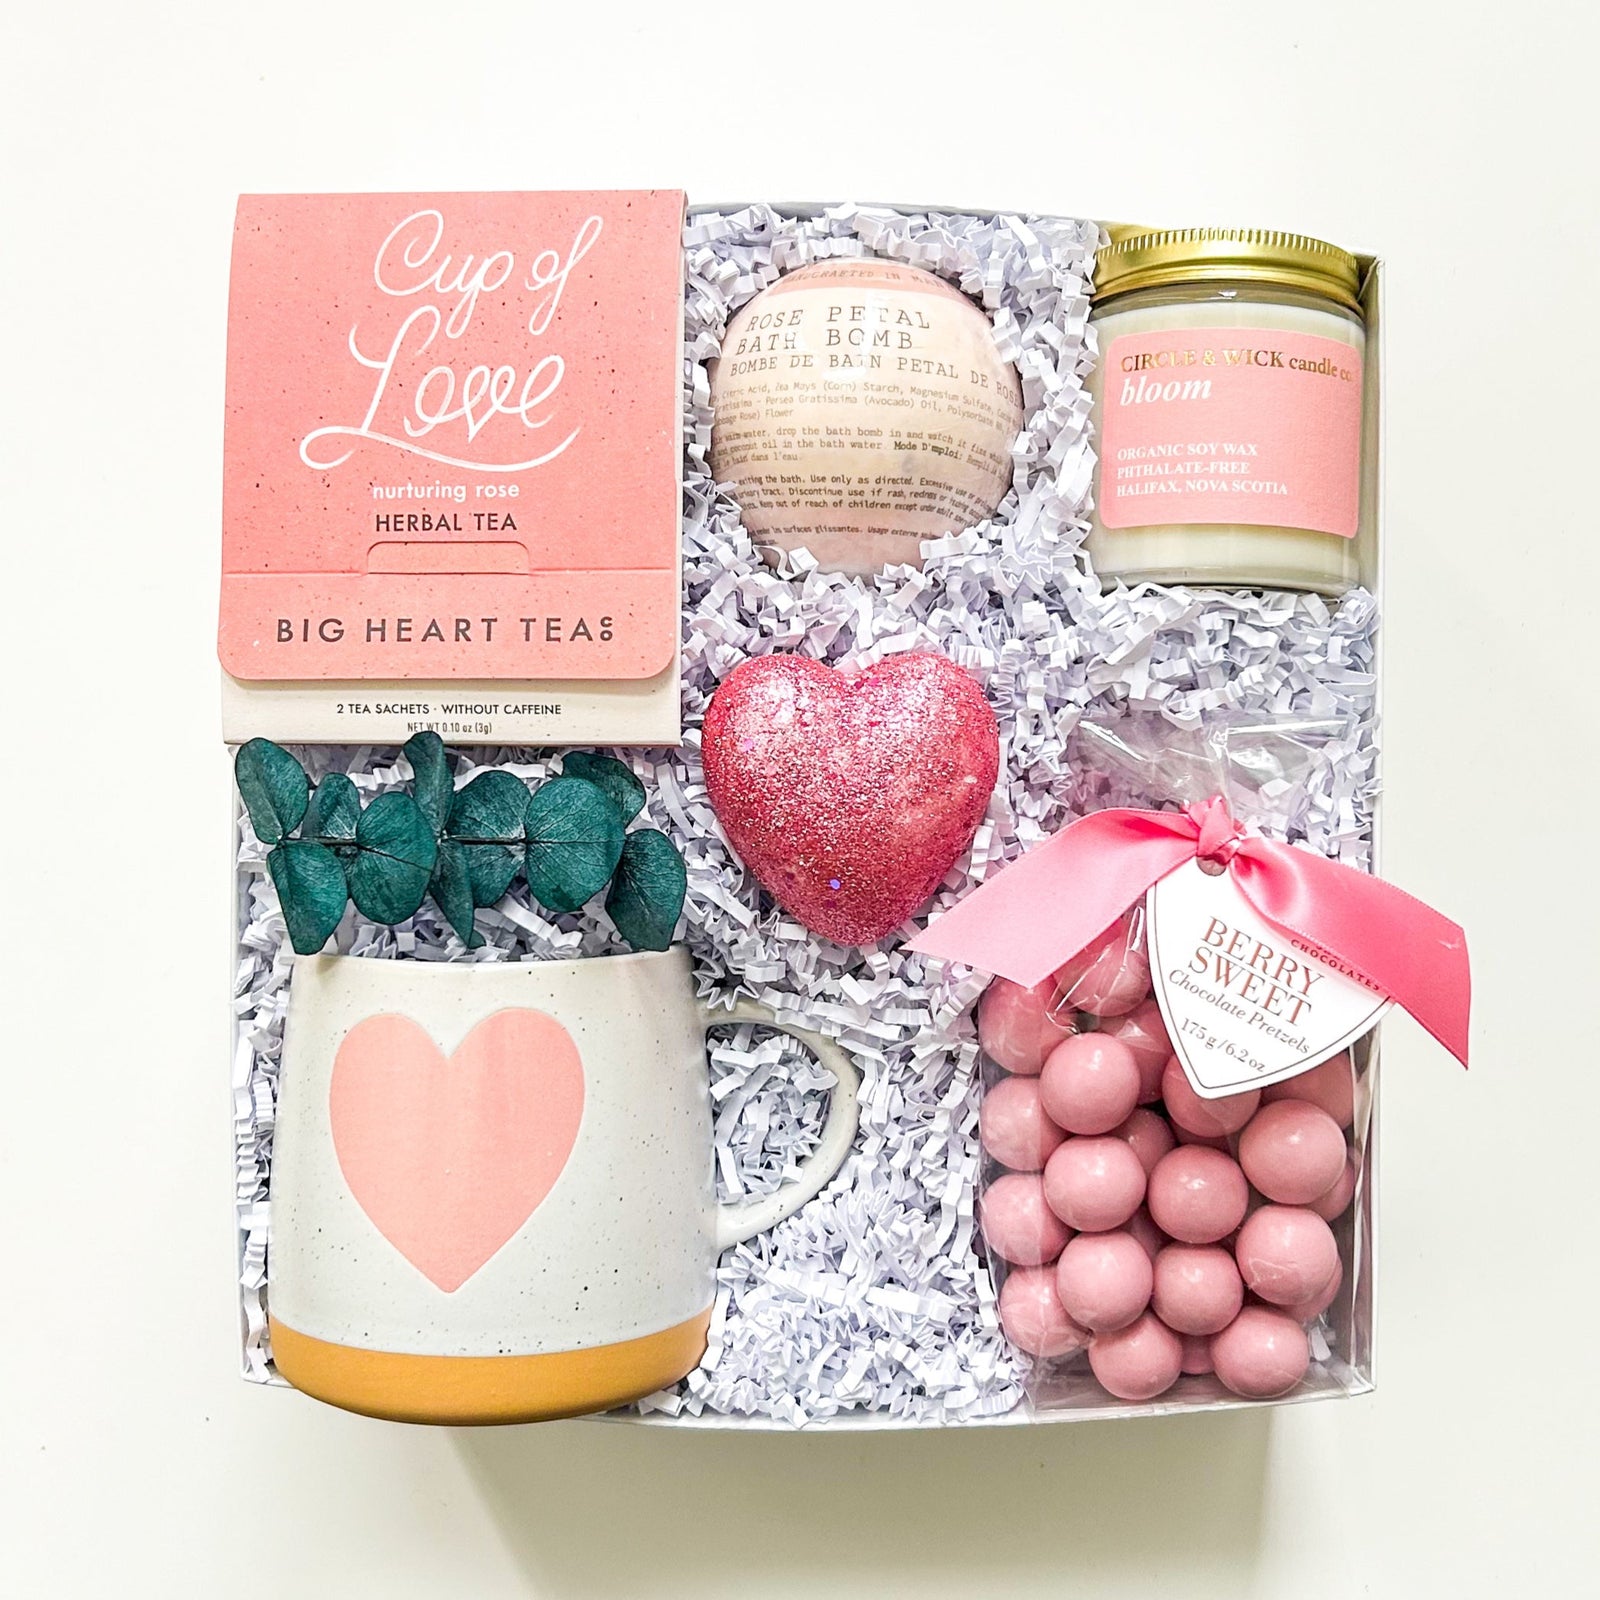 Perfect Romantic Valentine gift for your Boyfriend | Shopping Ideas